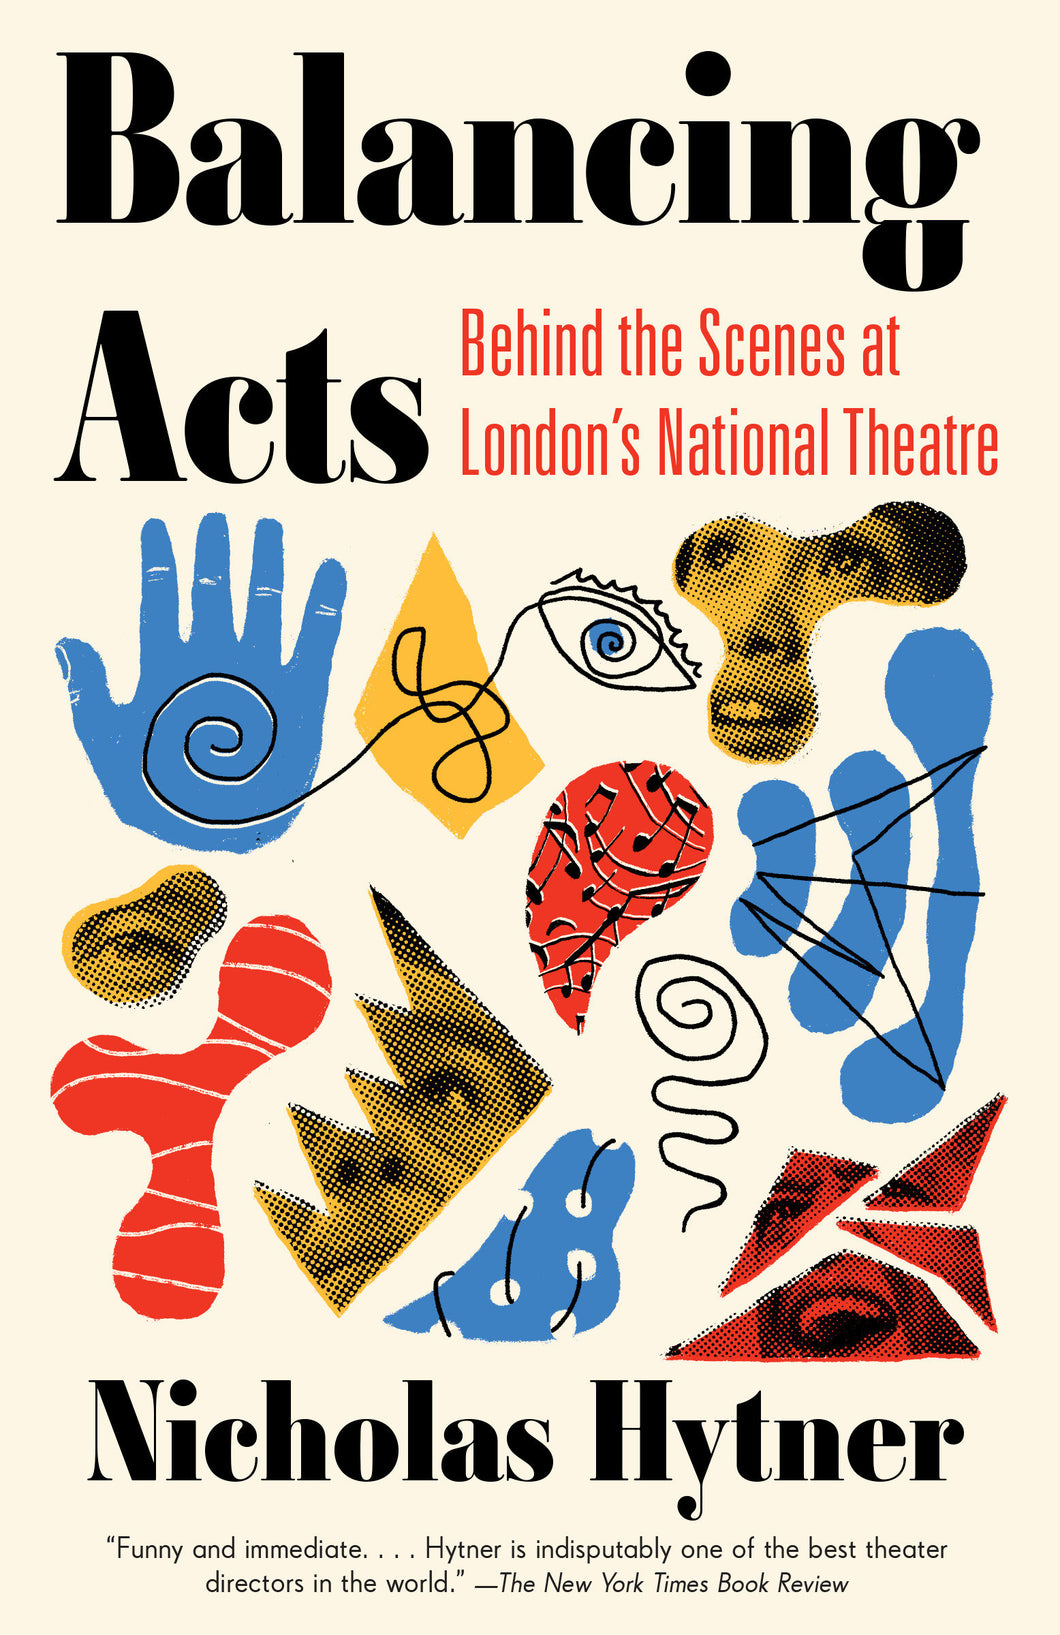 Balancing Acts: Behind the Scenes at London's National Theatre